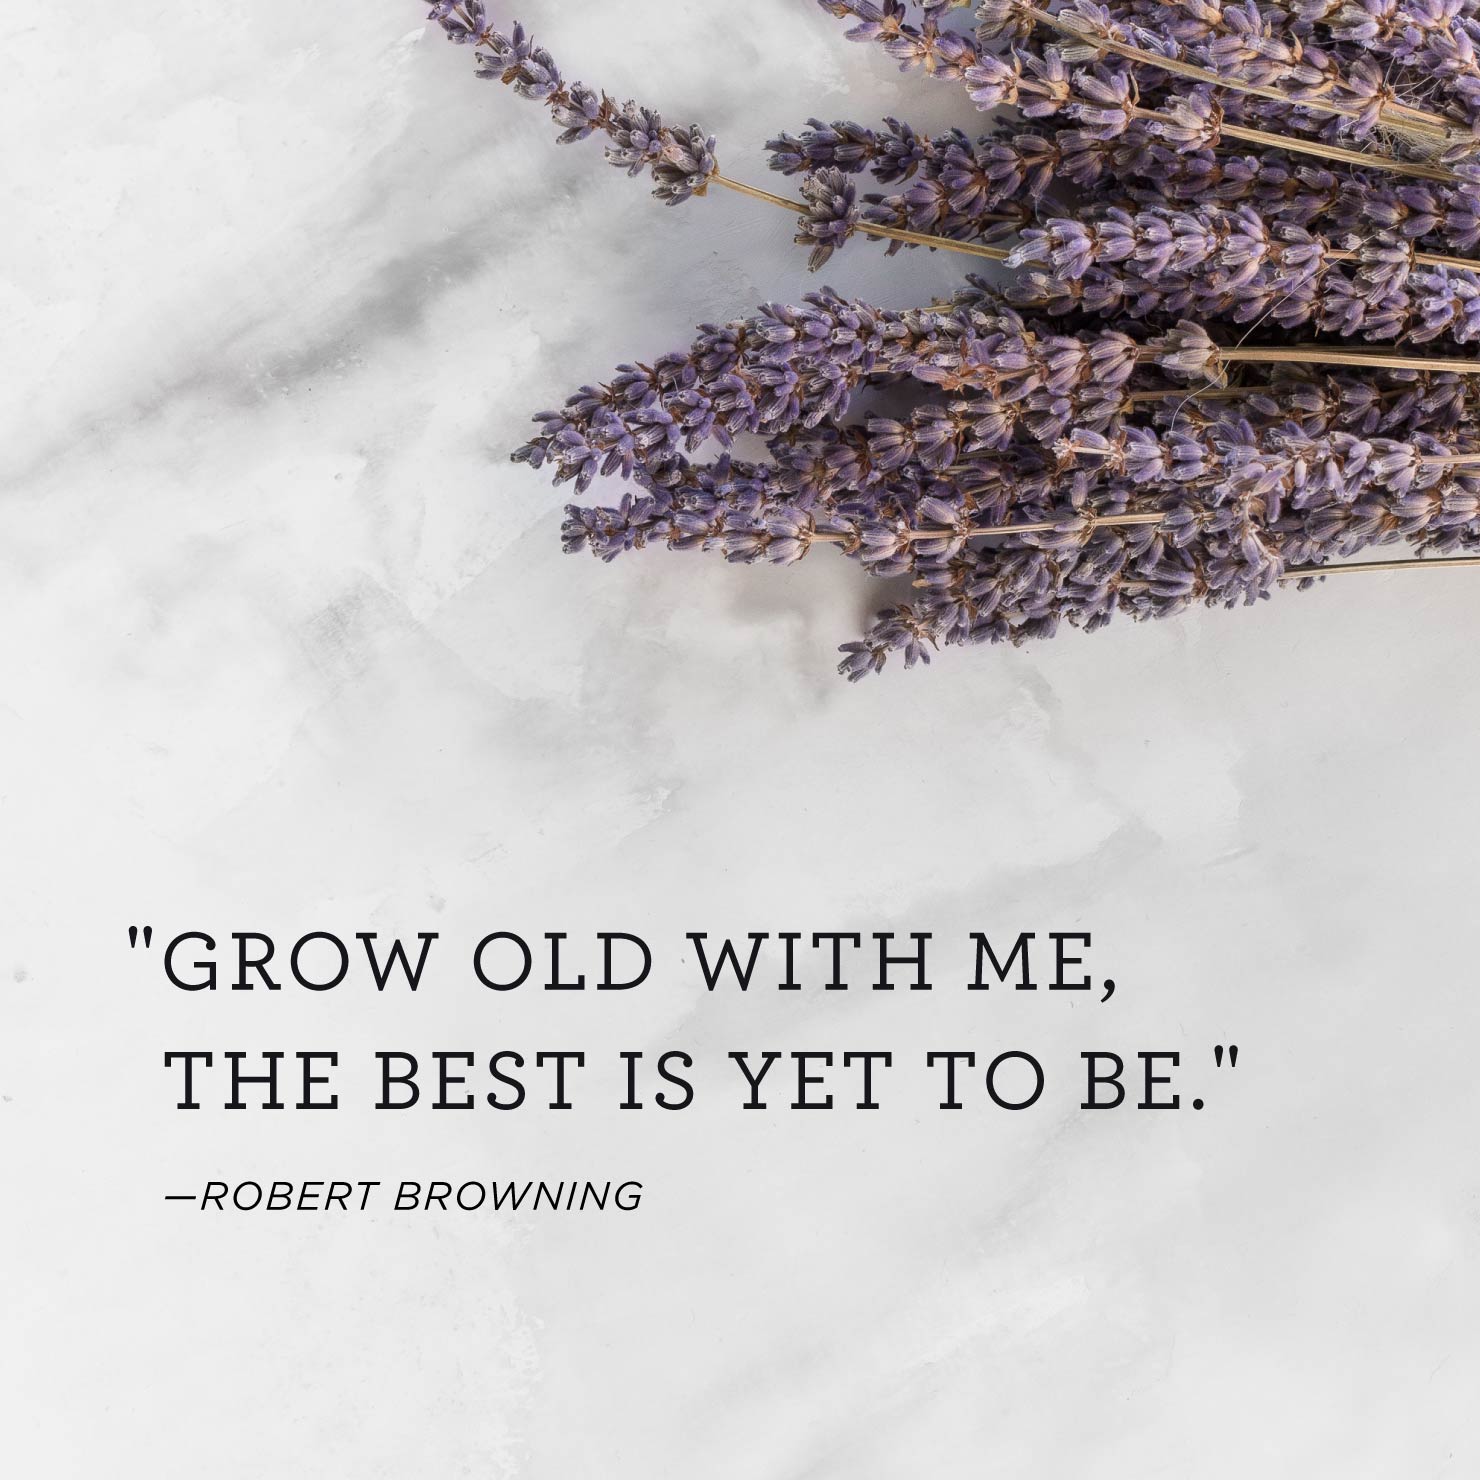 Quote above background image: Grow old with me, the best is yet to be. - Robert Browning